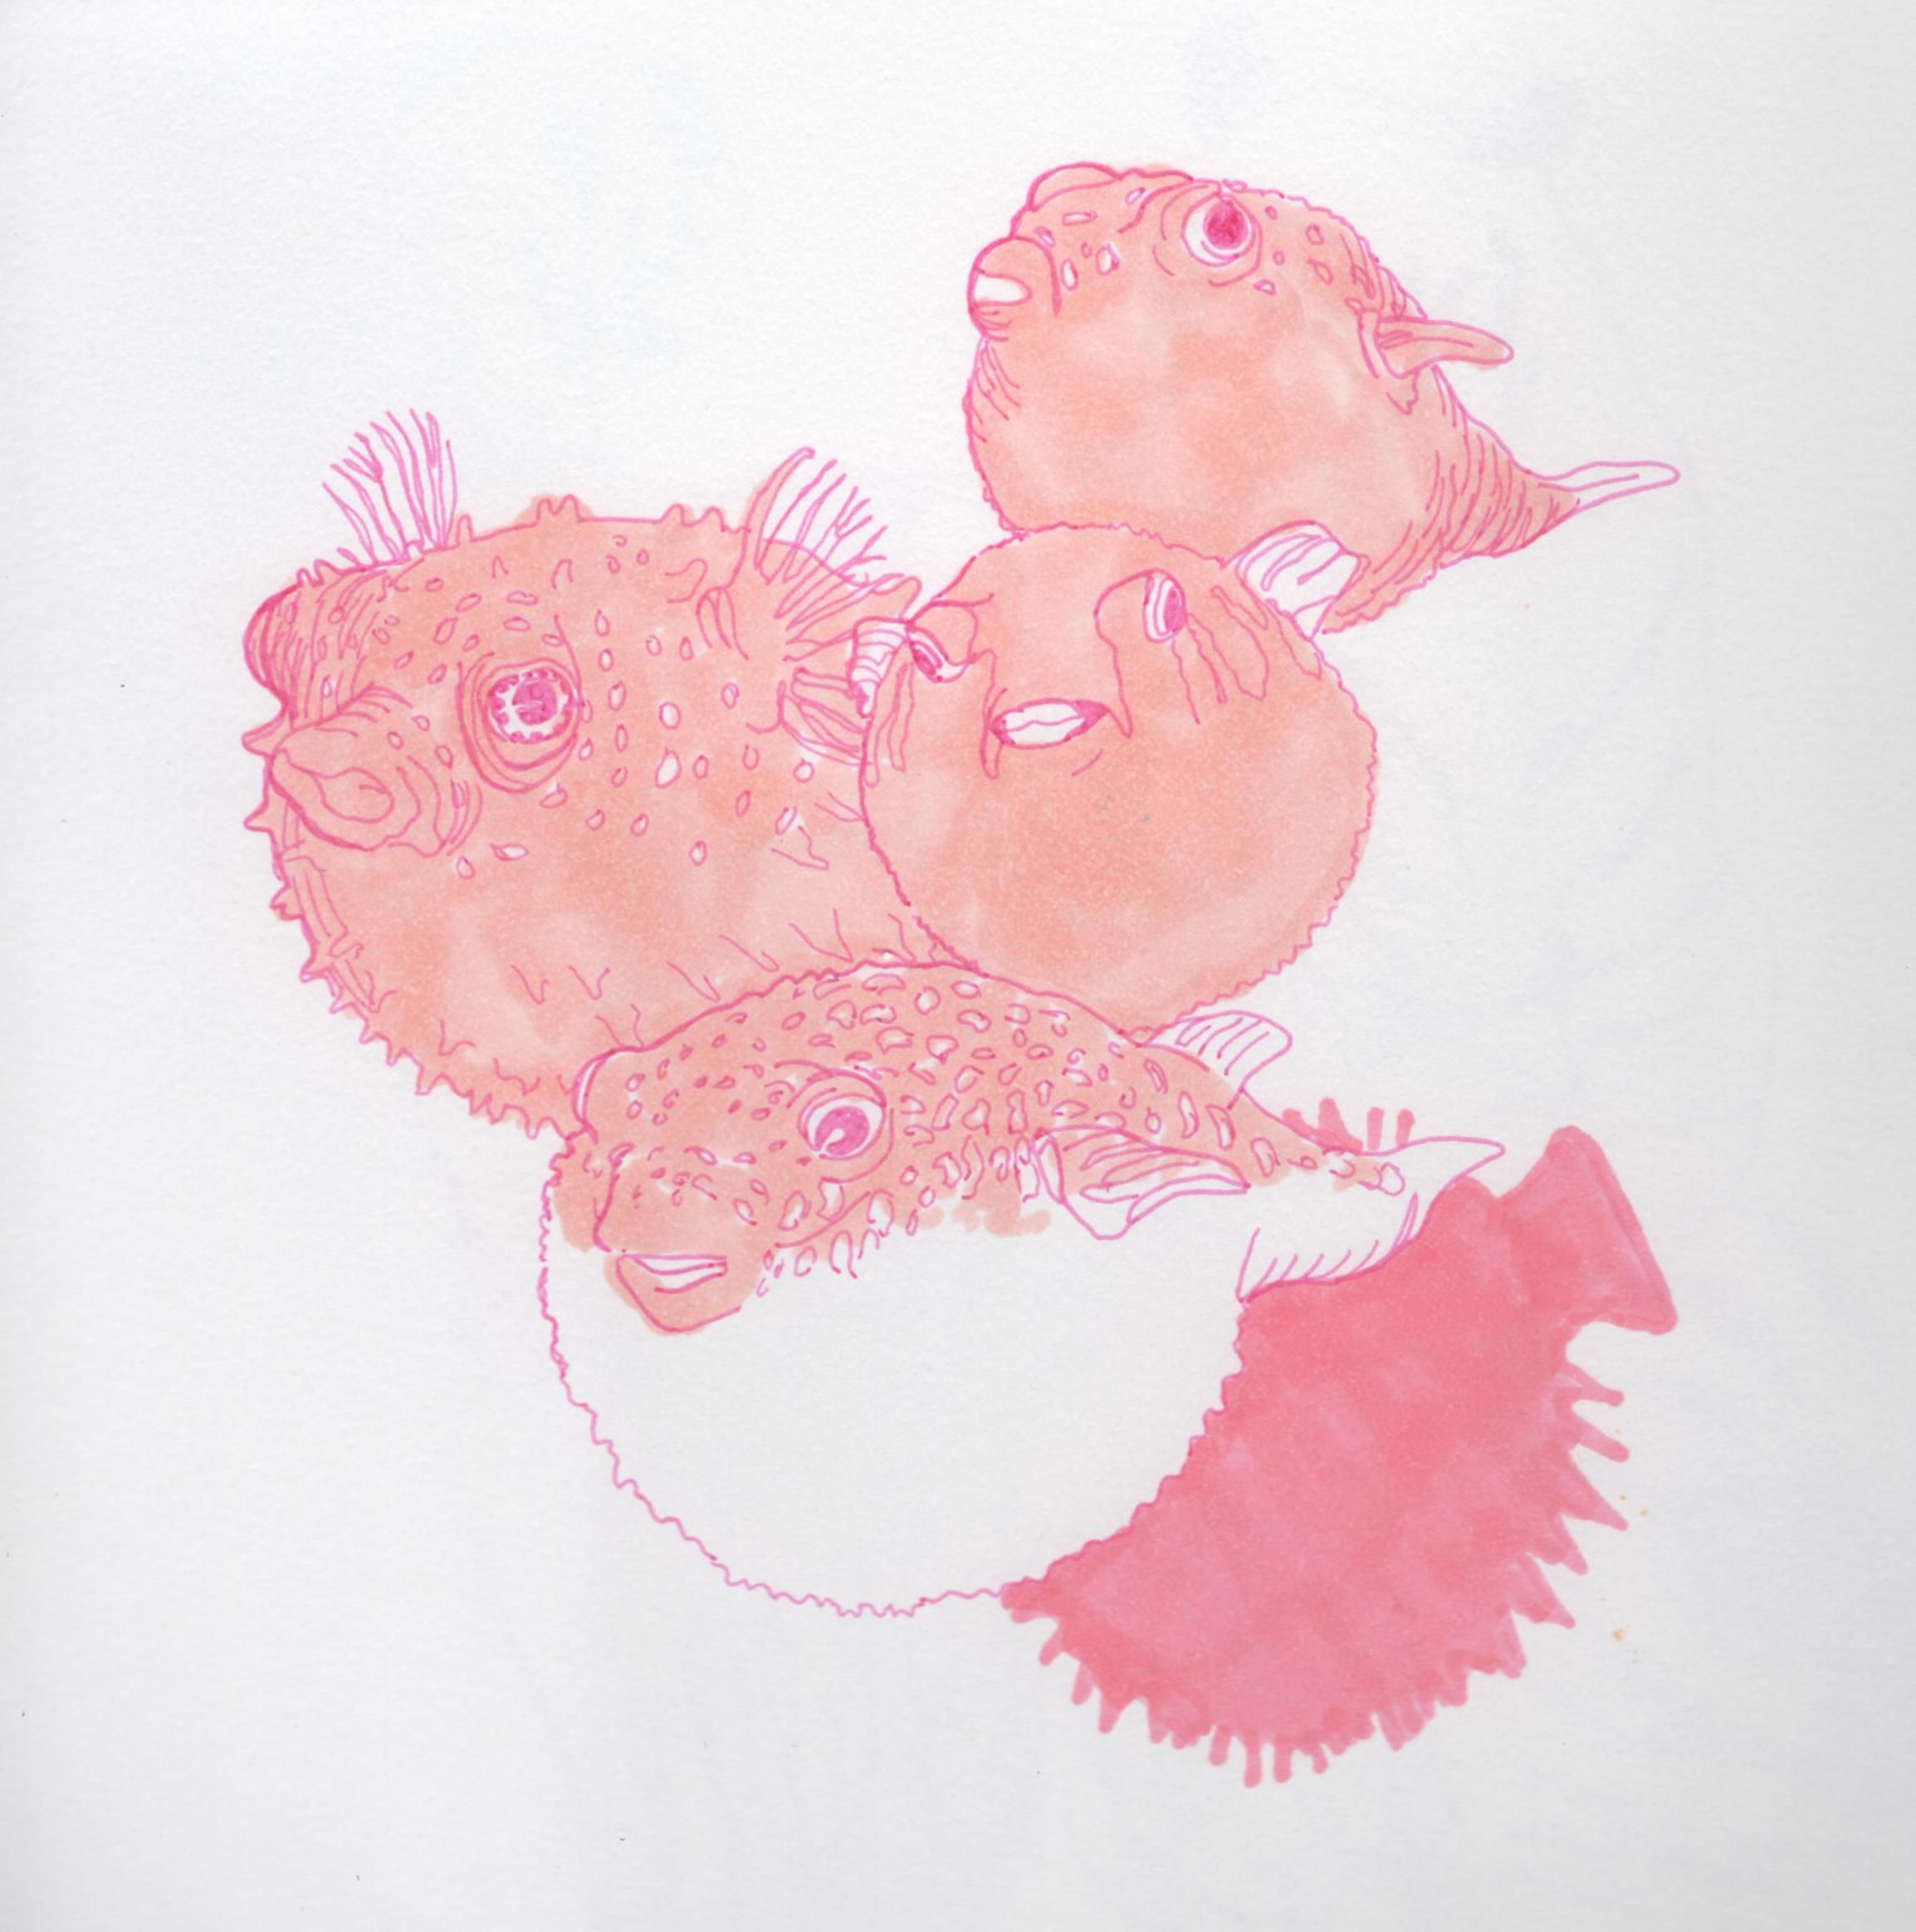 Four blowfish in shades of pink, peach, and coral, swimming in a cluster.